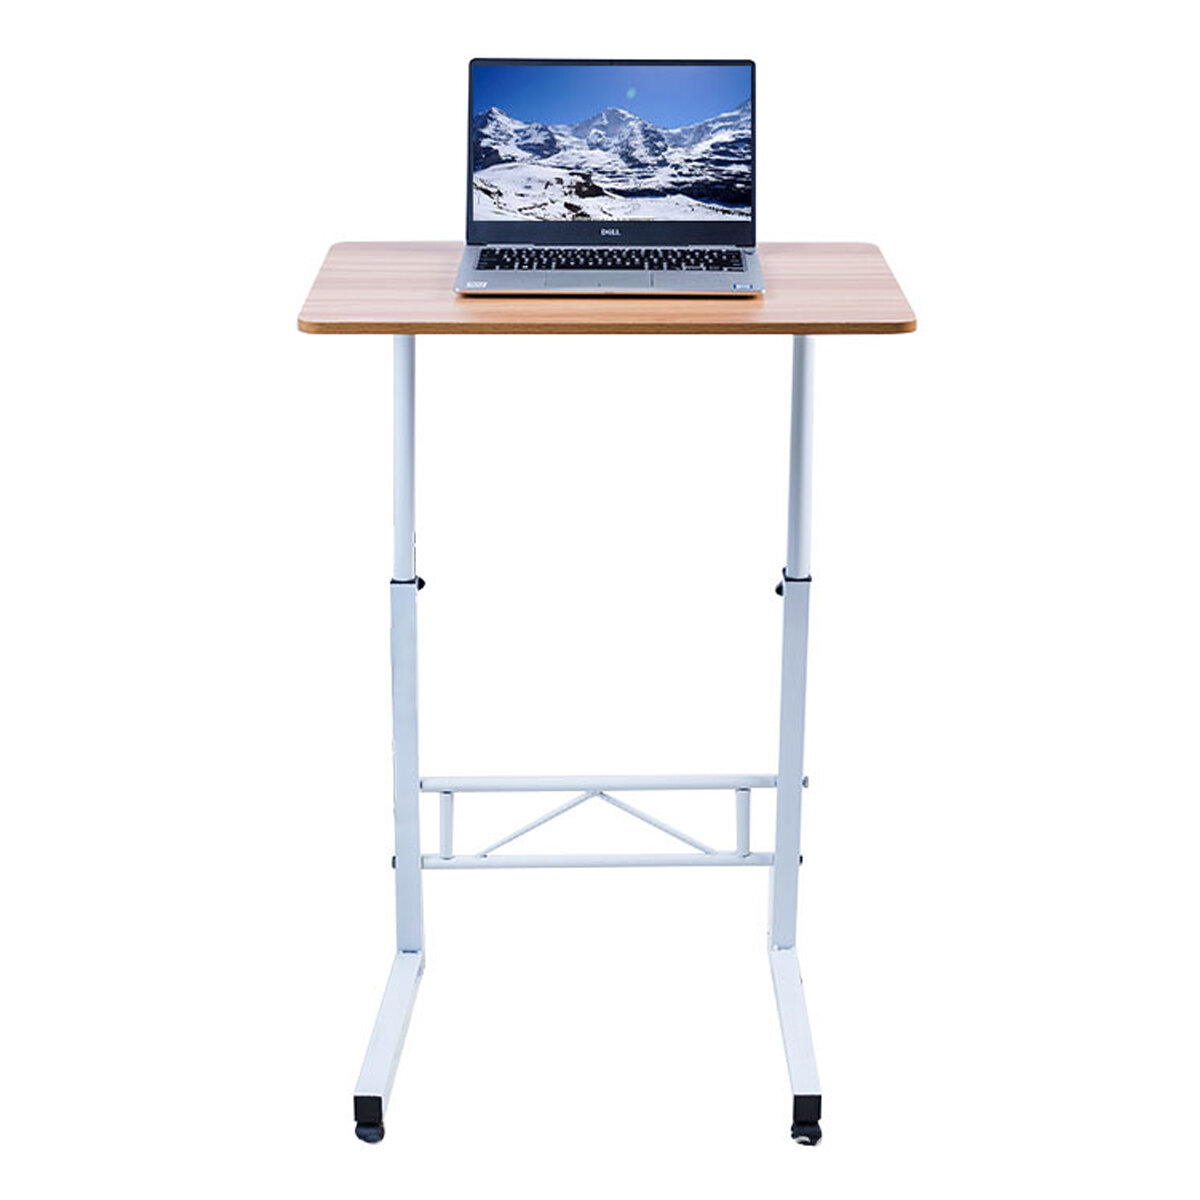 Wooden Movable Adjustable Height Macbook Laptop Desk Table with Universal Wheel